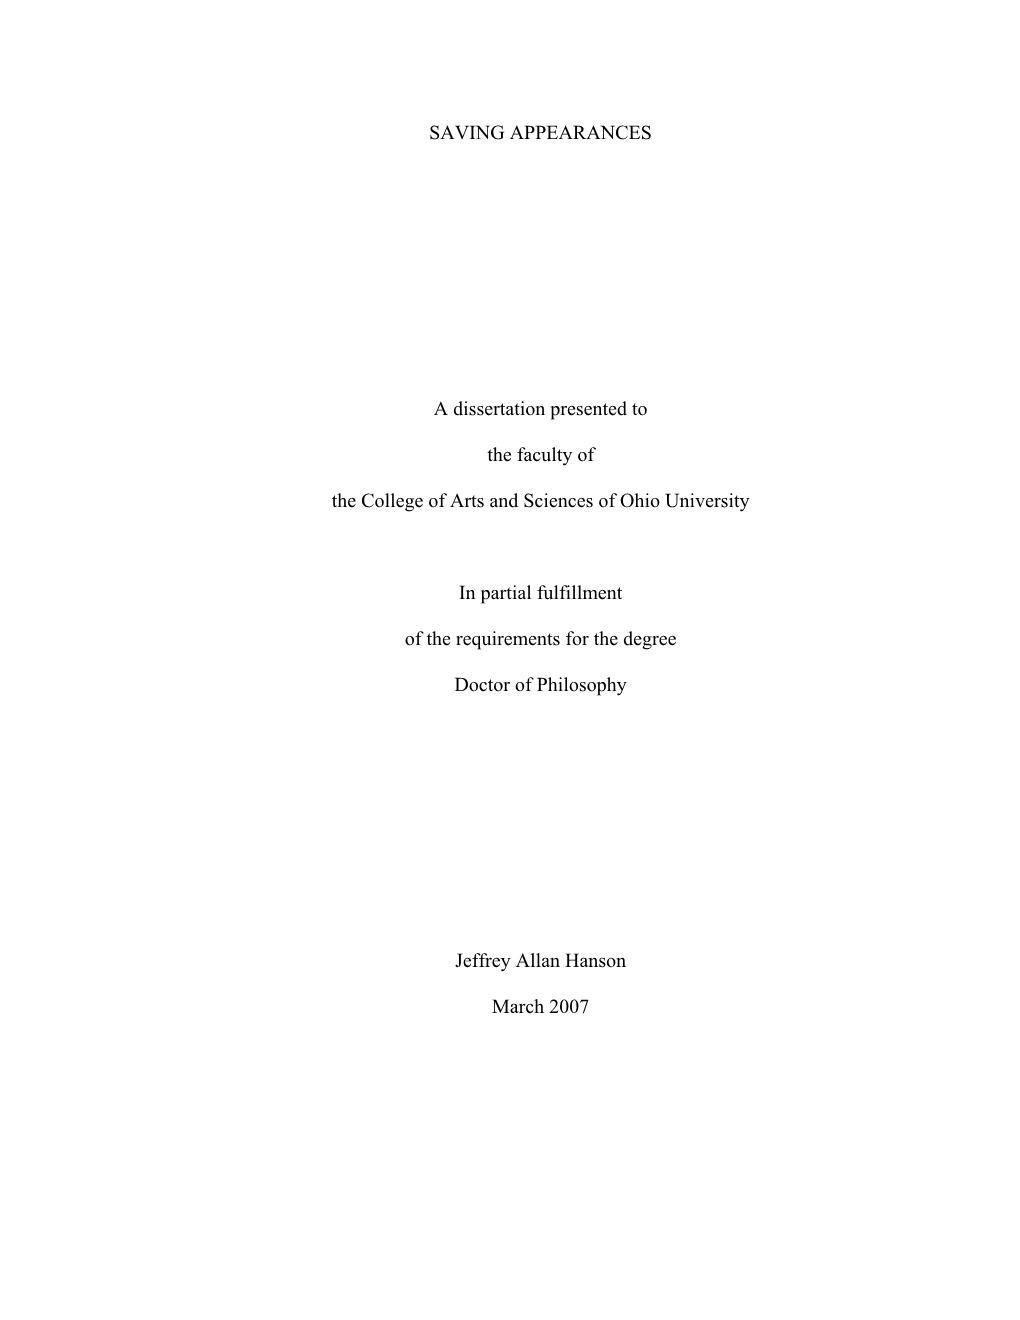 SAVING APPEARANCES a Dissertation Presented to the Faculty